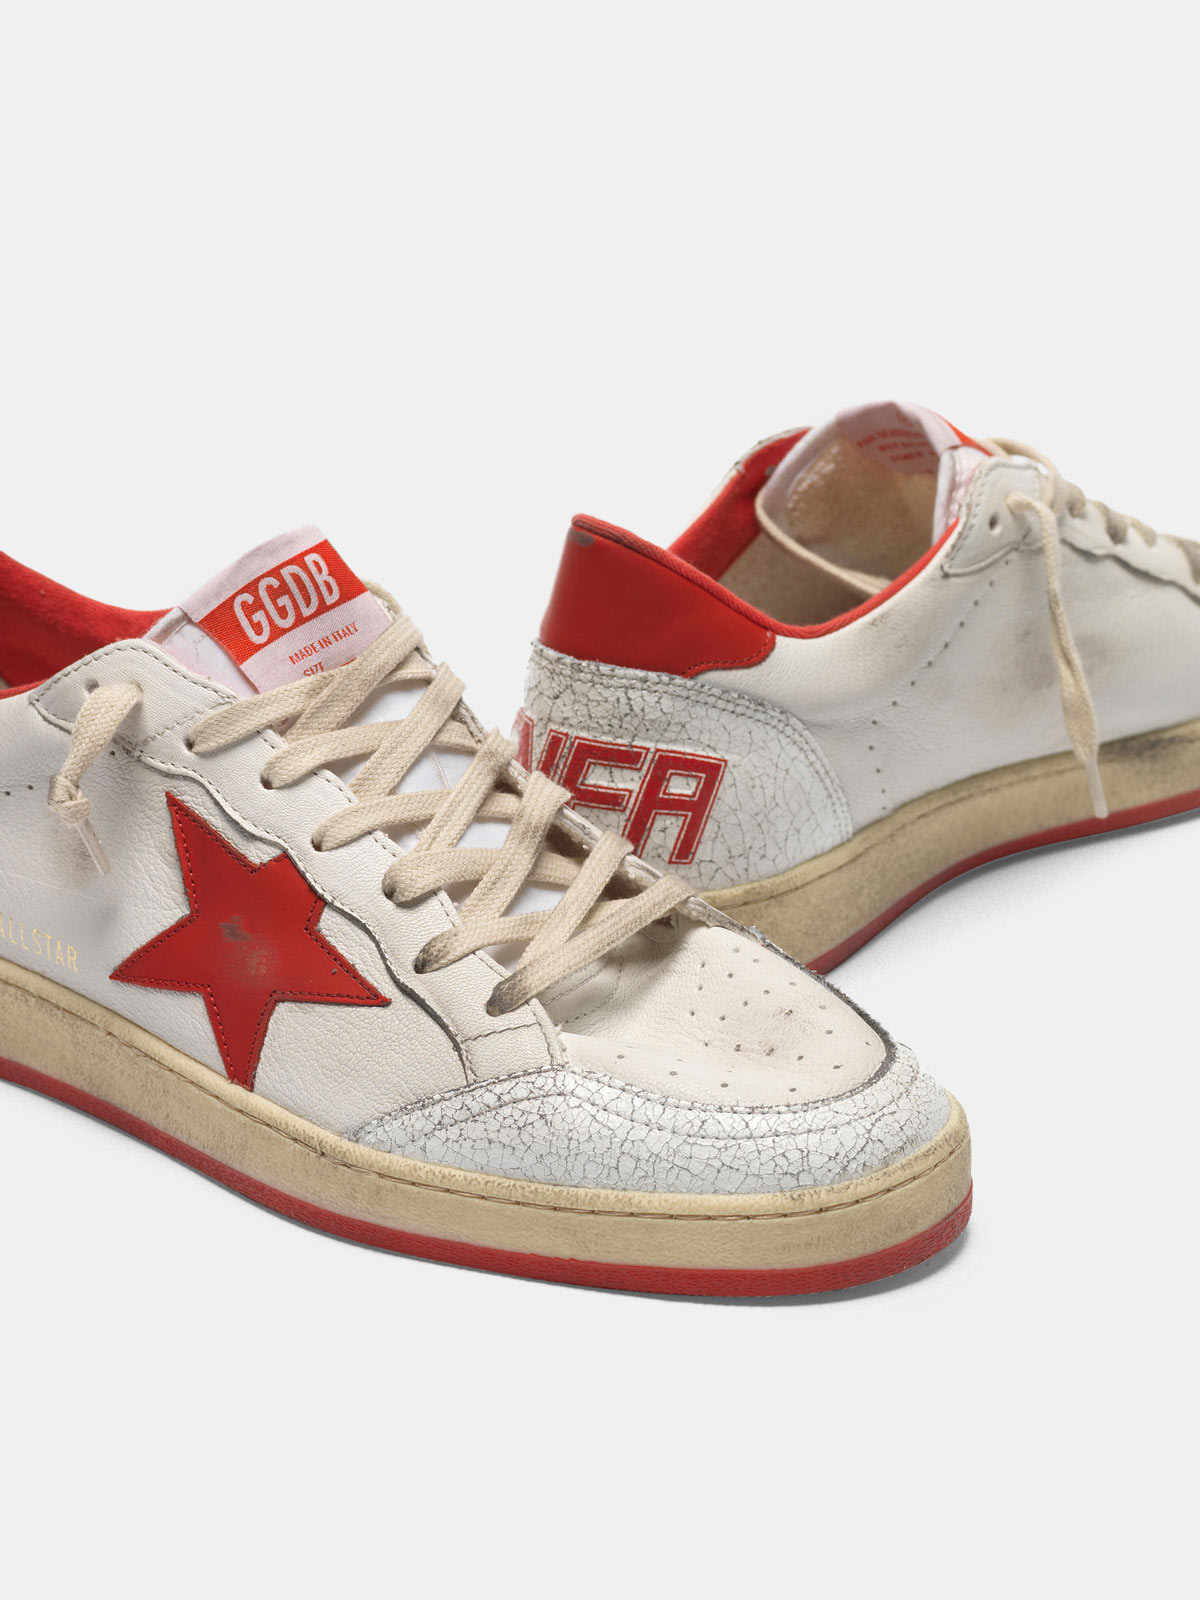 White Ball Star sneakers in leather with red star and heel tab | Golden  Goose